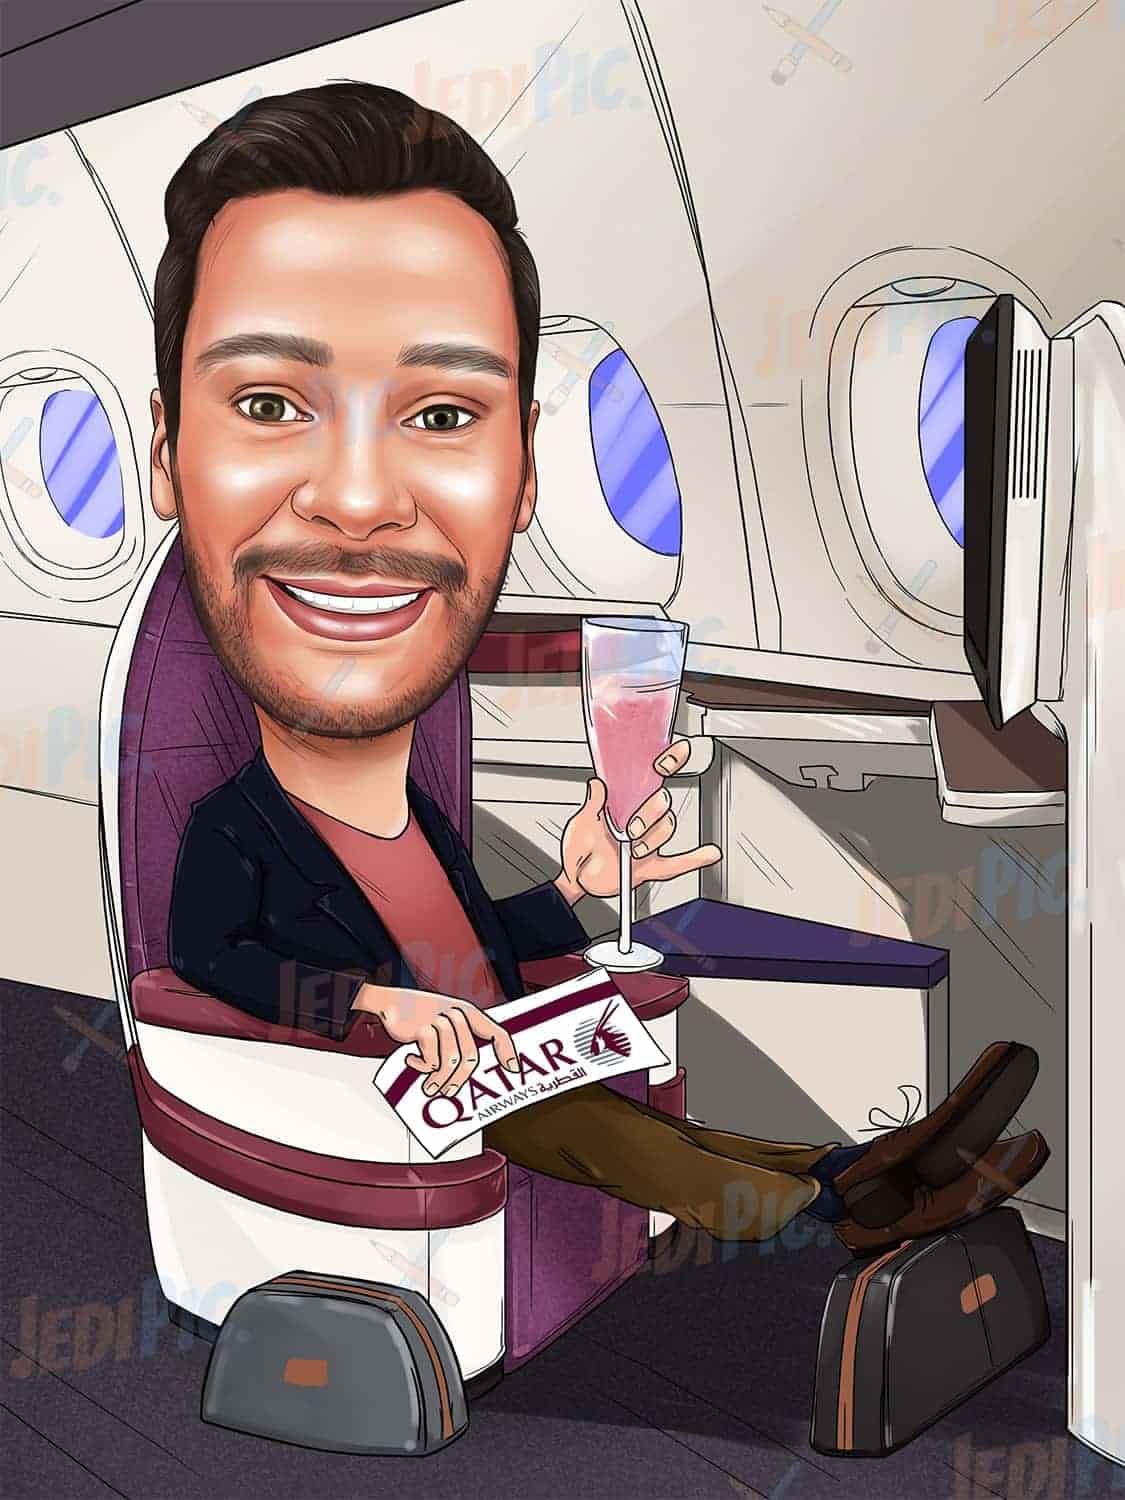 Man in Business Class Caricature Drawing from Photo